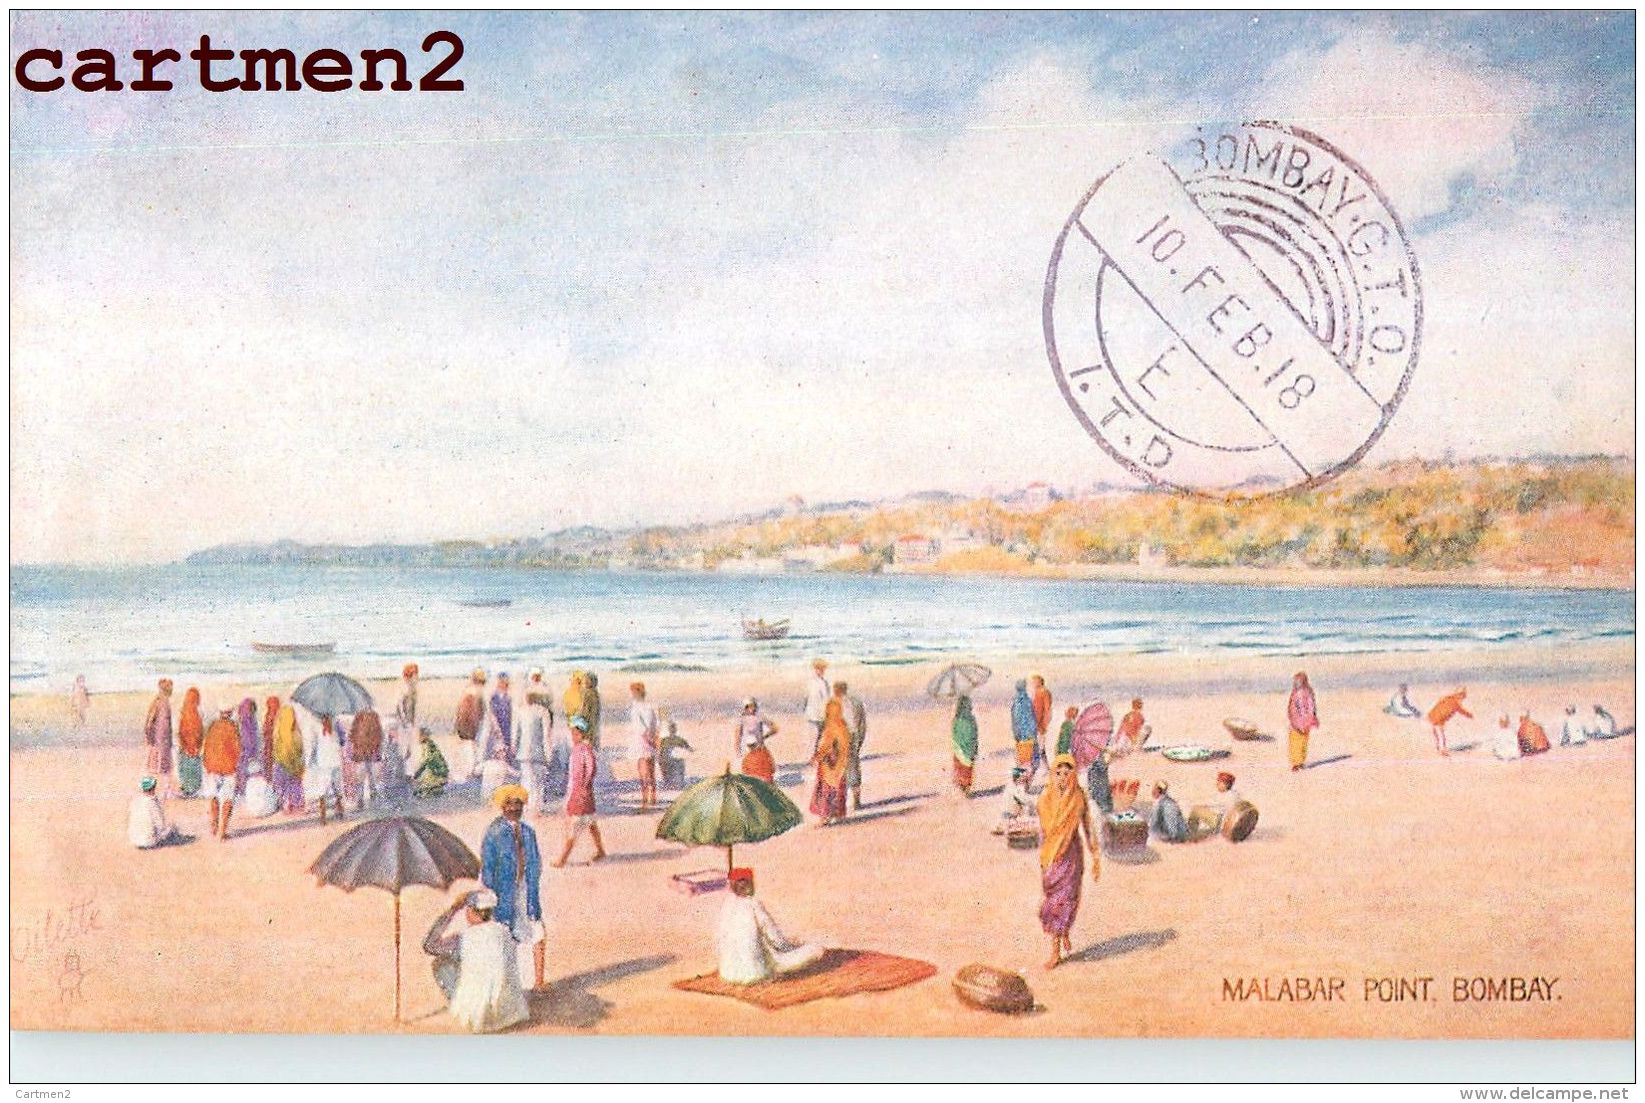 BOMBAY MALABAR POINT + CACHET BOMBAY G.T.O. I.T.D. MARCOPHILIE STAMP INDIA OILETTE WIDE-WIDE-WORLD - India